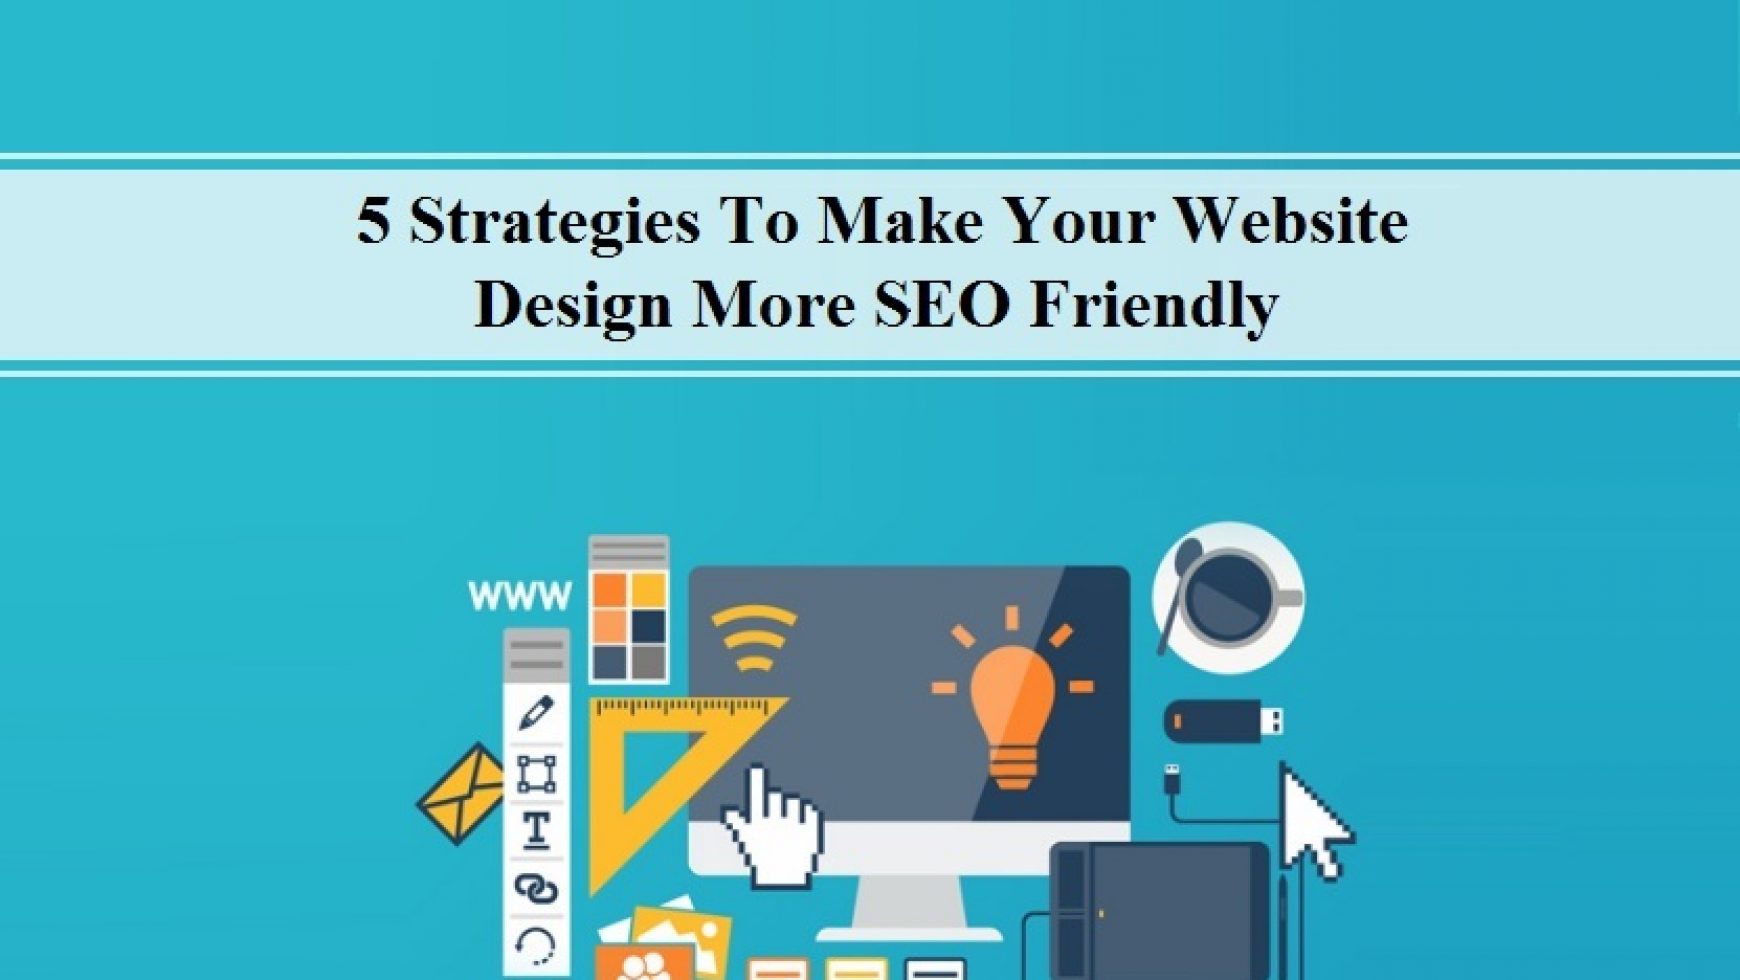 5 Strategies To Make Your Website Design More SEO Friendly